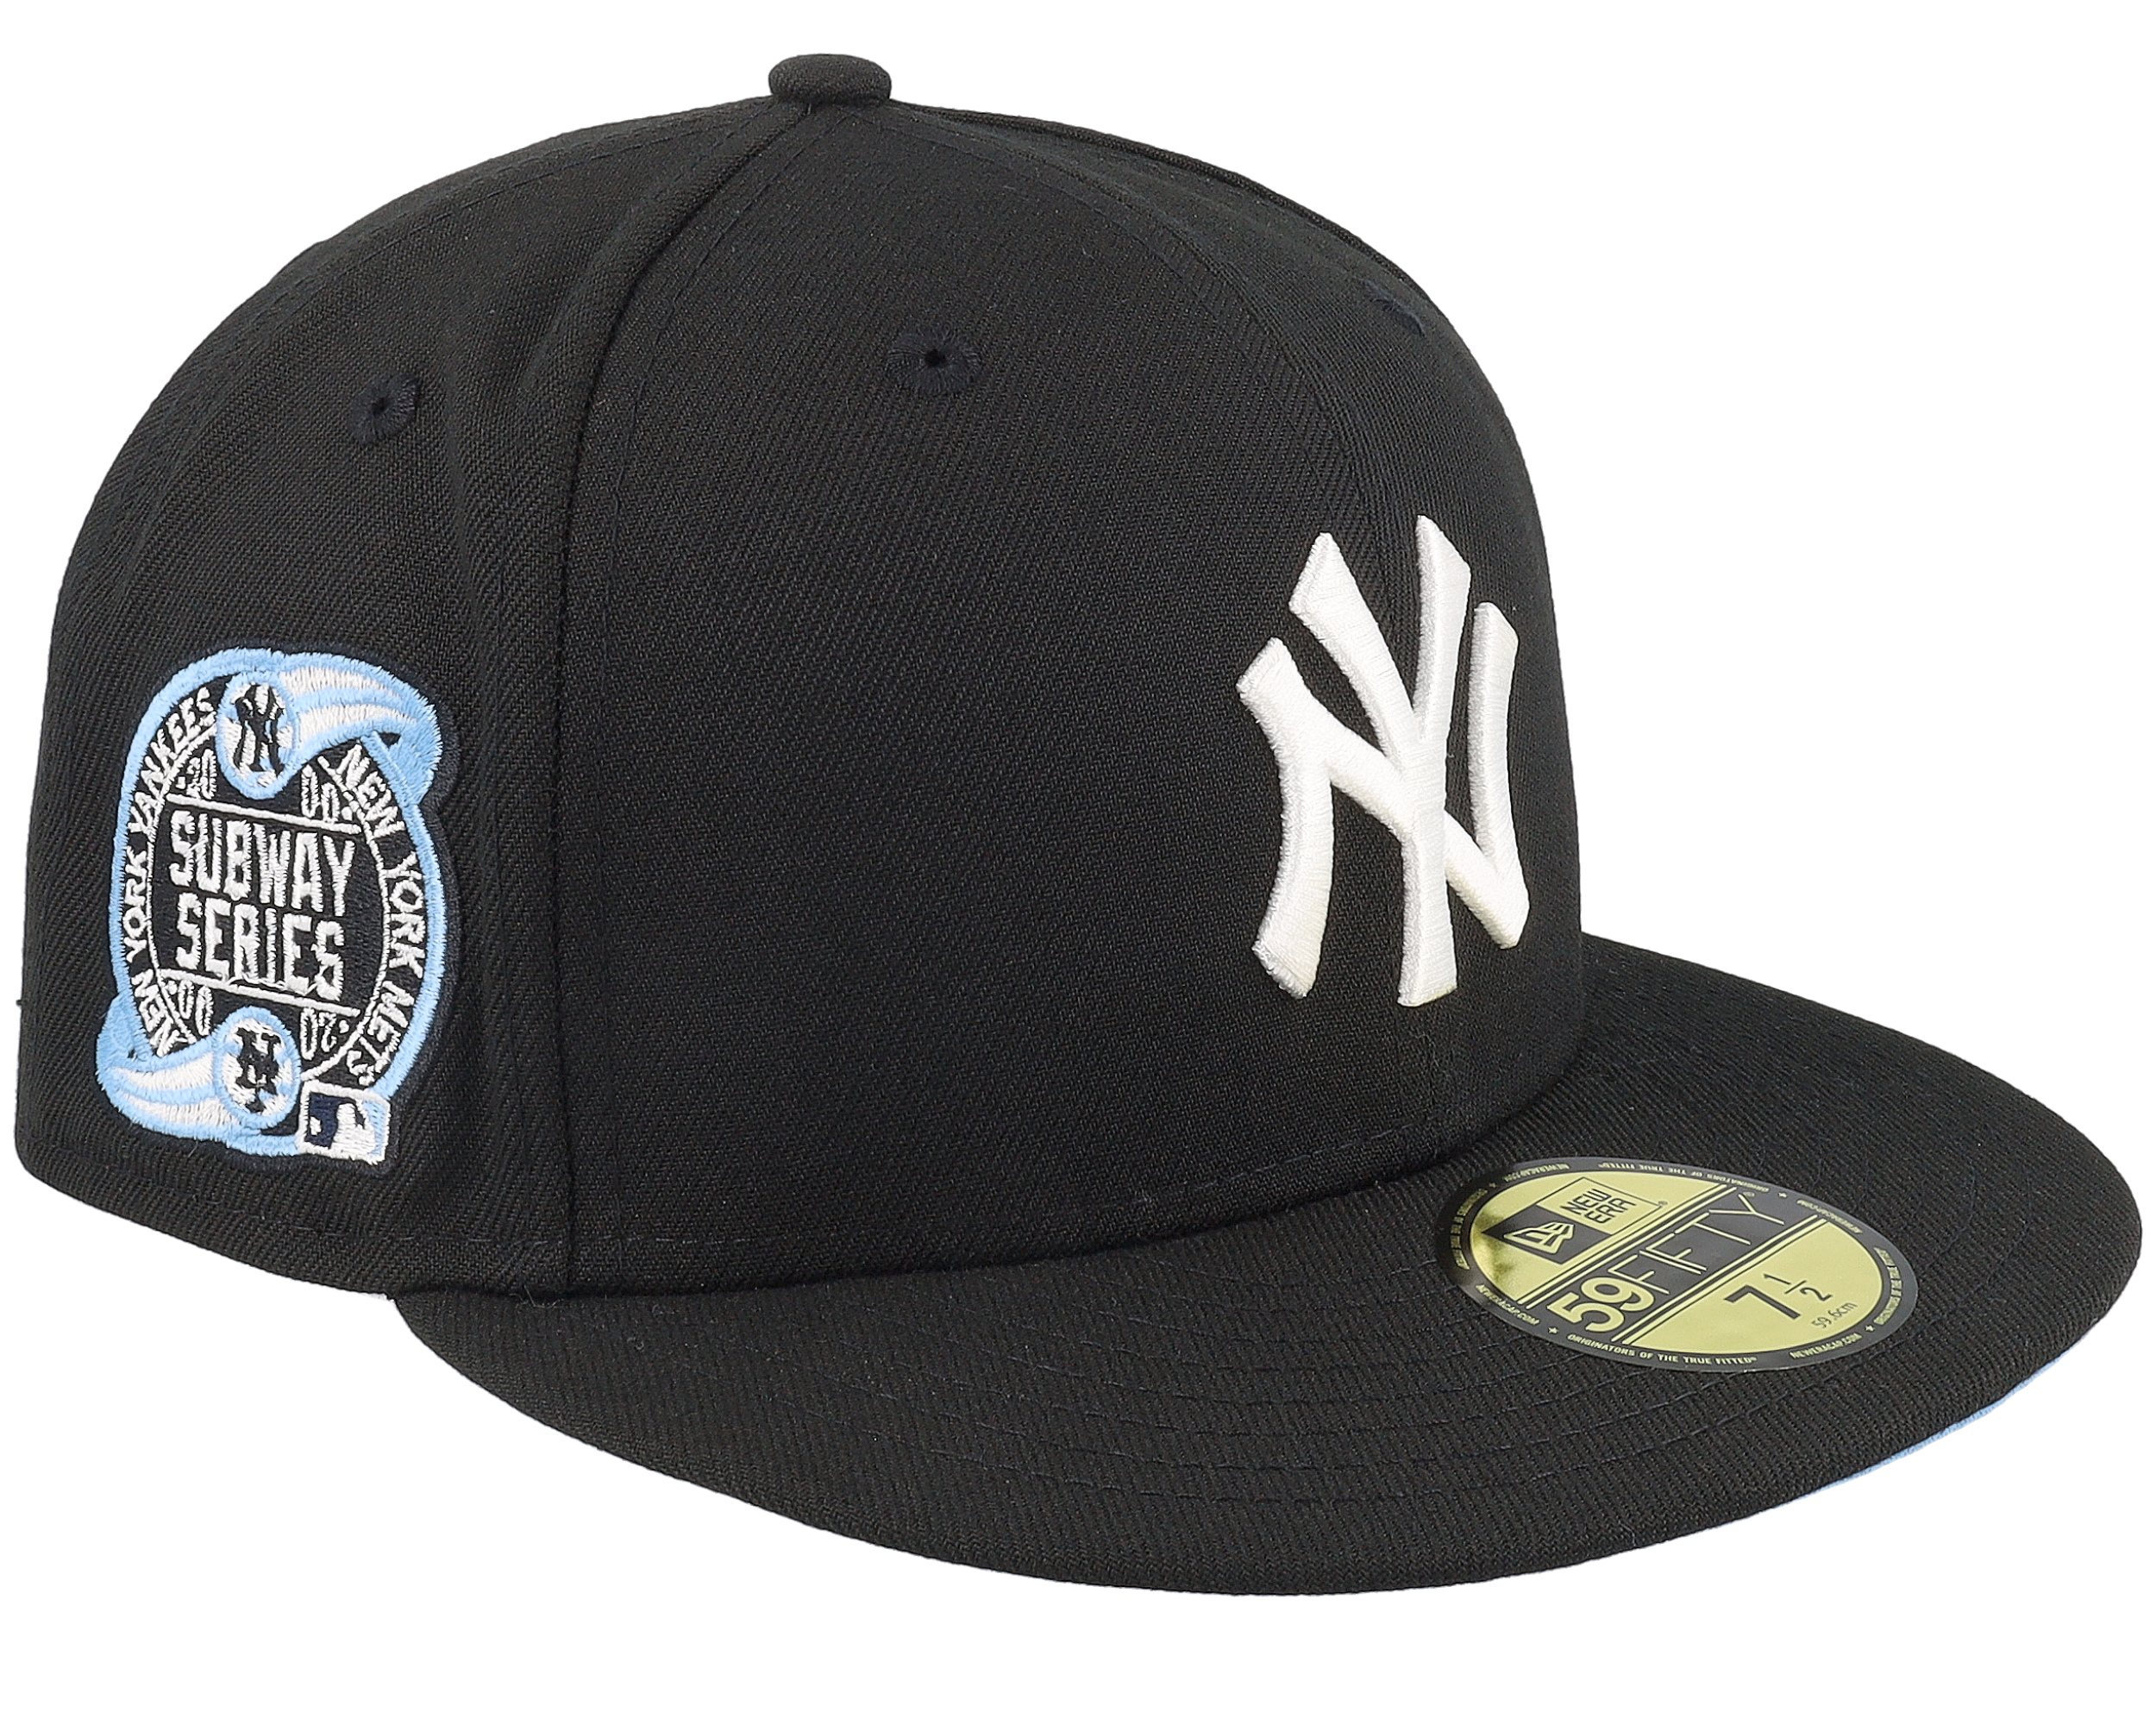 New York Yankees Newspaper and Cigar 59FIFTY Black/Sky Fitted